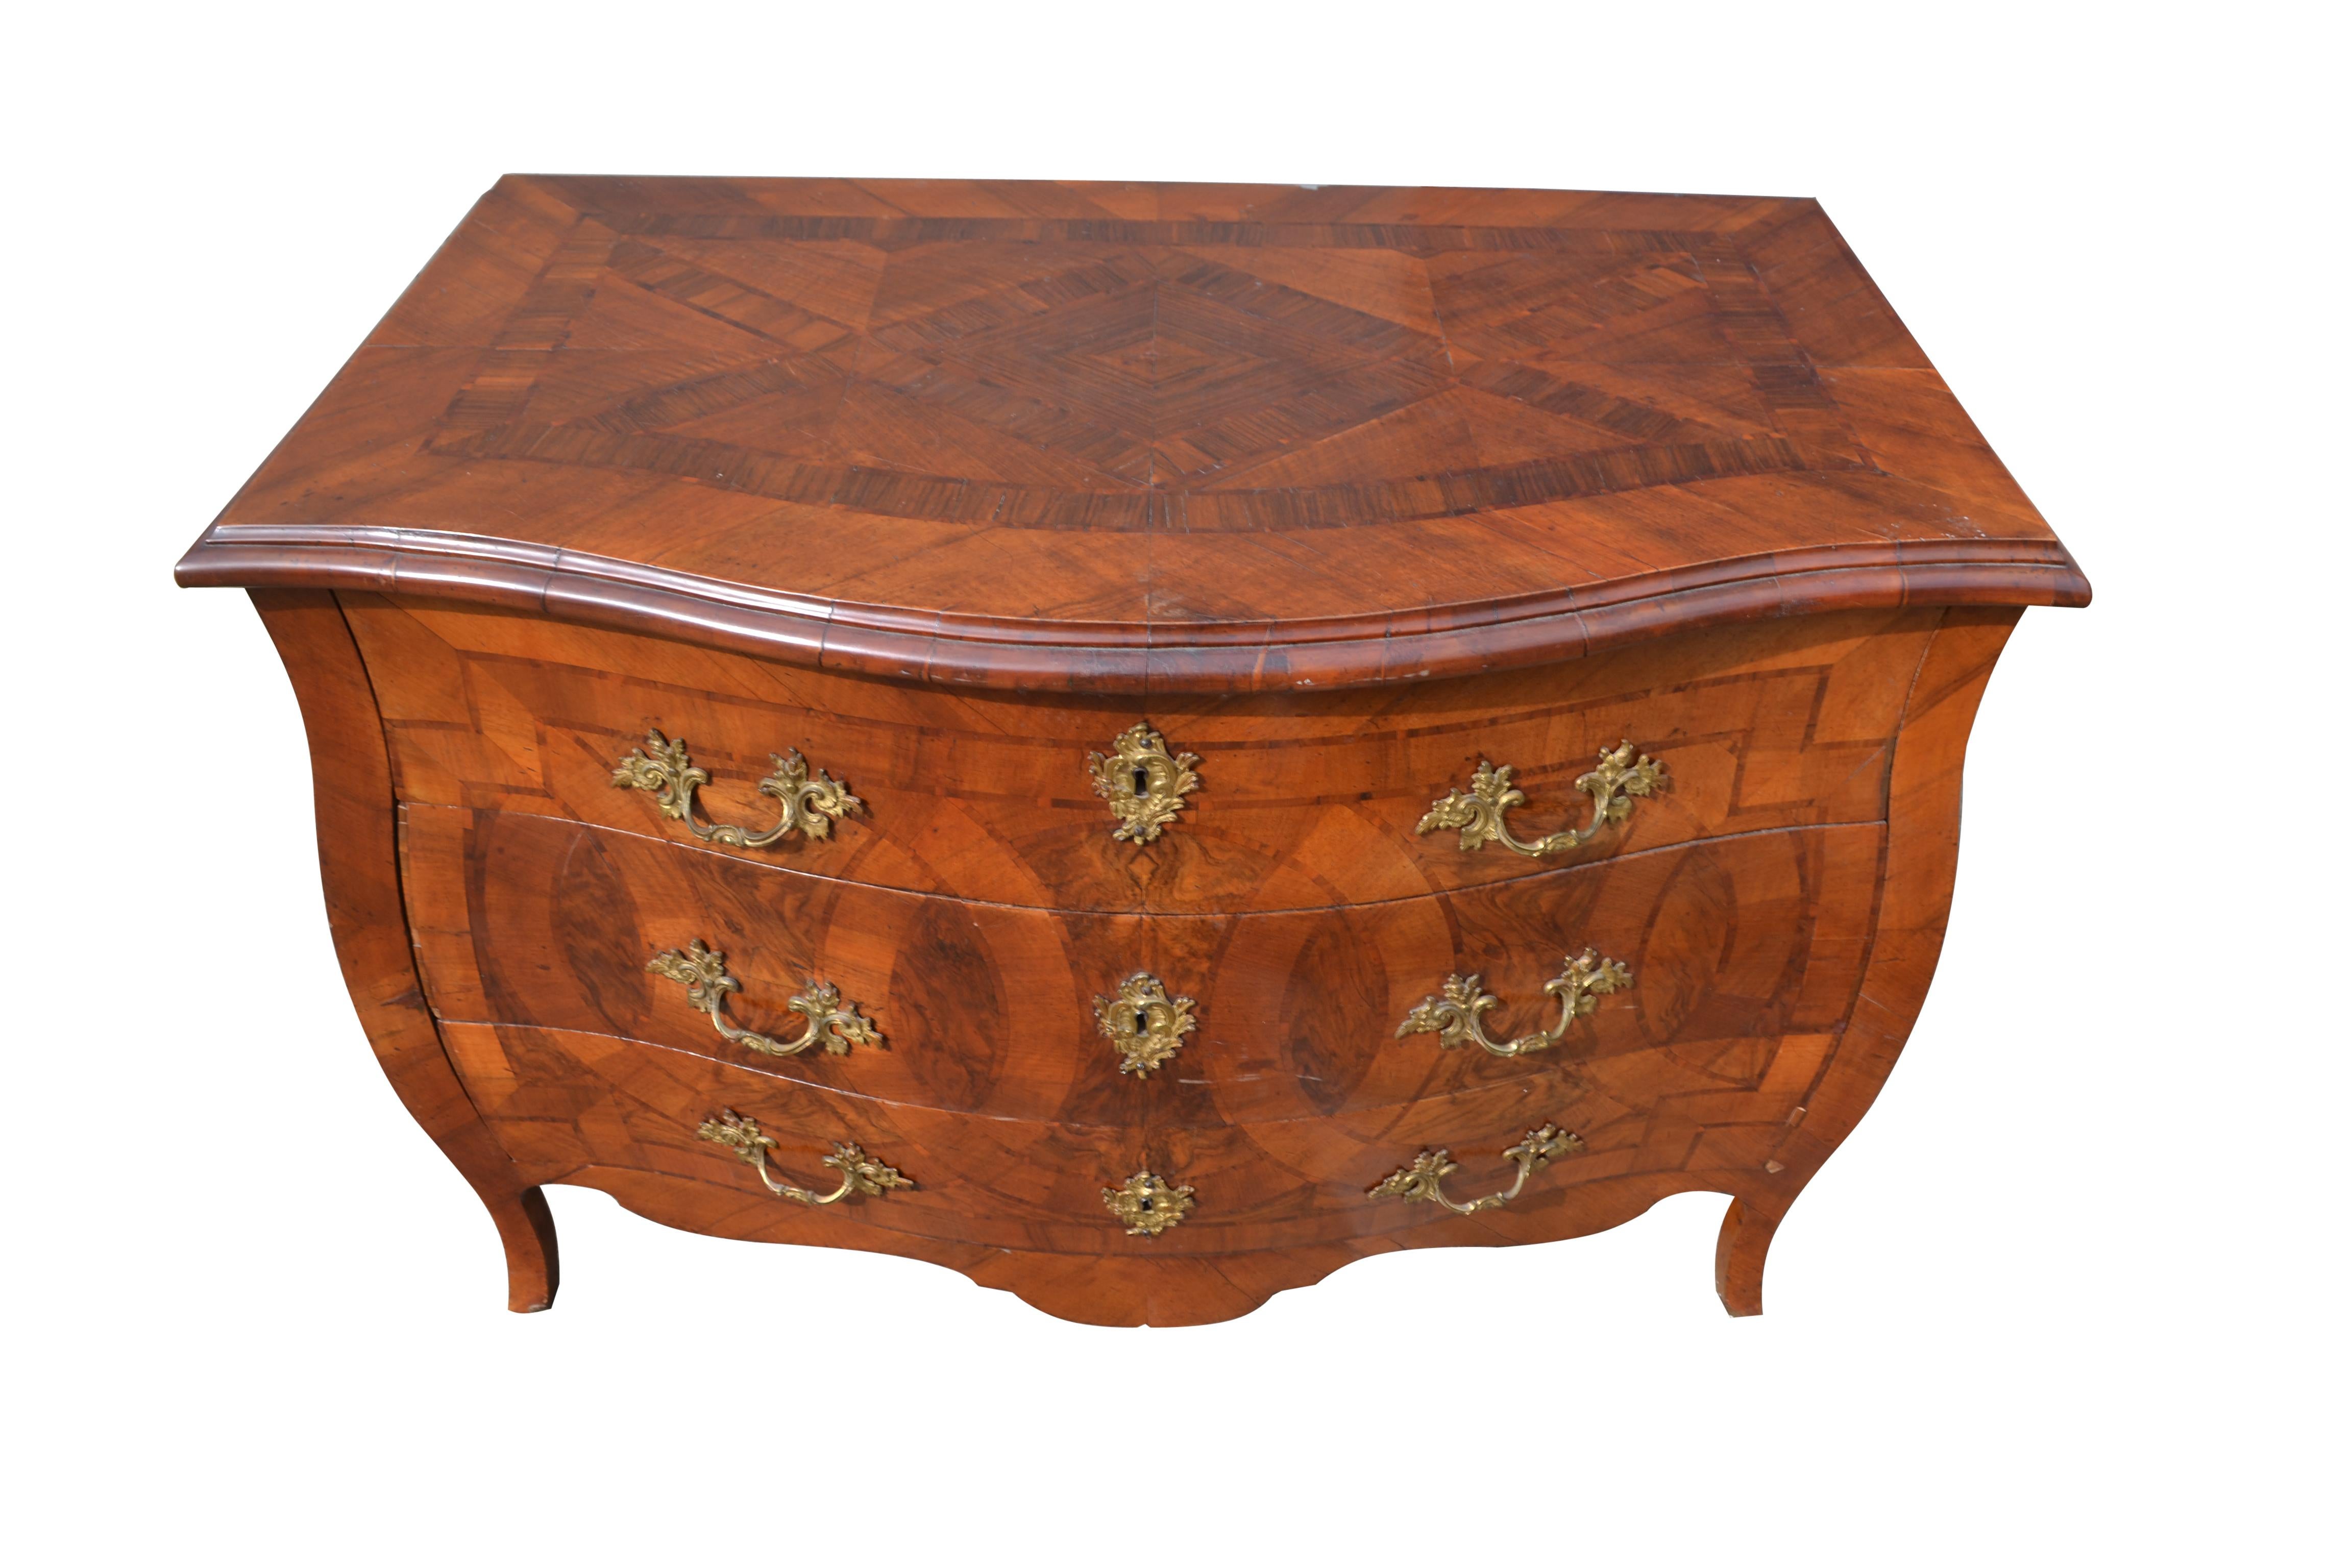 A fine Italian mid-18th century figured-walnut bombe three drawer commode; the commode is inlaid on all visible sides including the top in attractive olive wood and walnut, and it sits on tall elegant swept feet. The commode has its original locks,